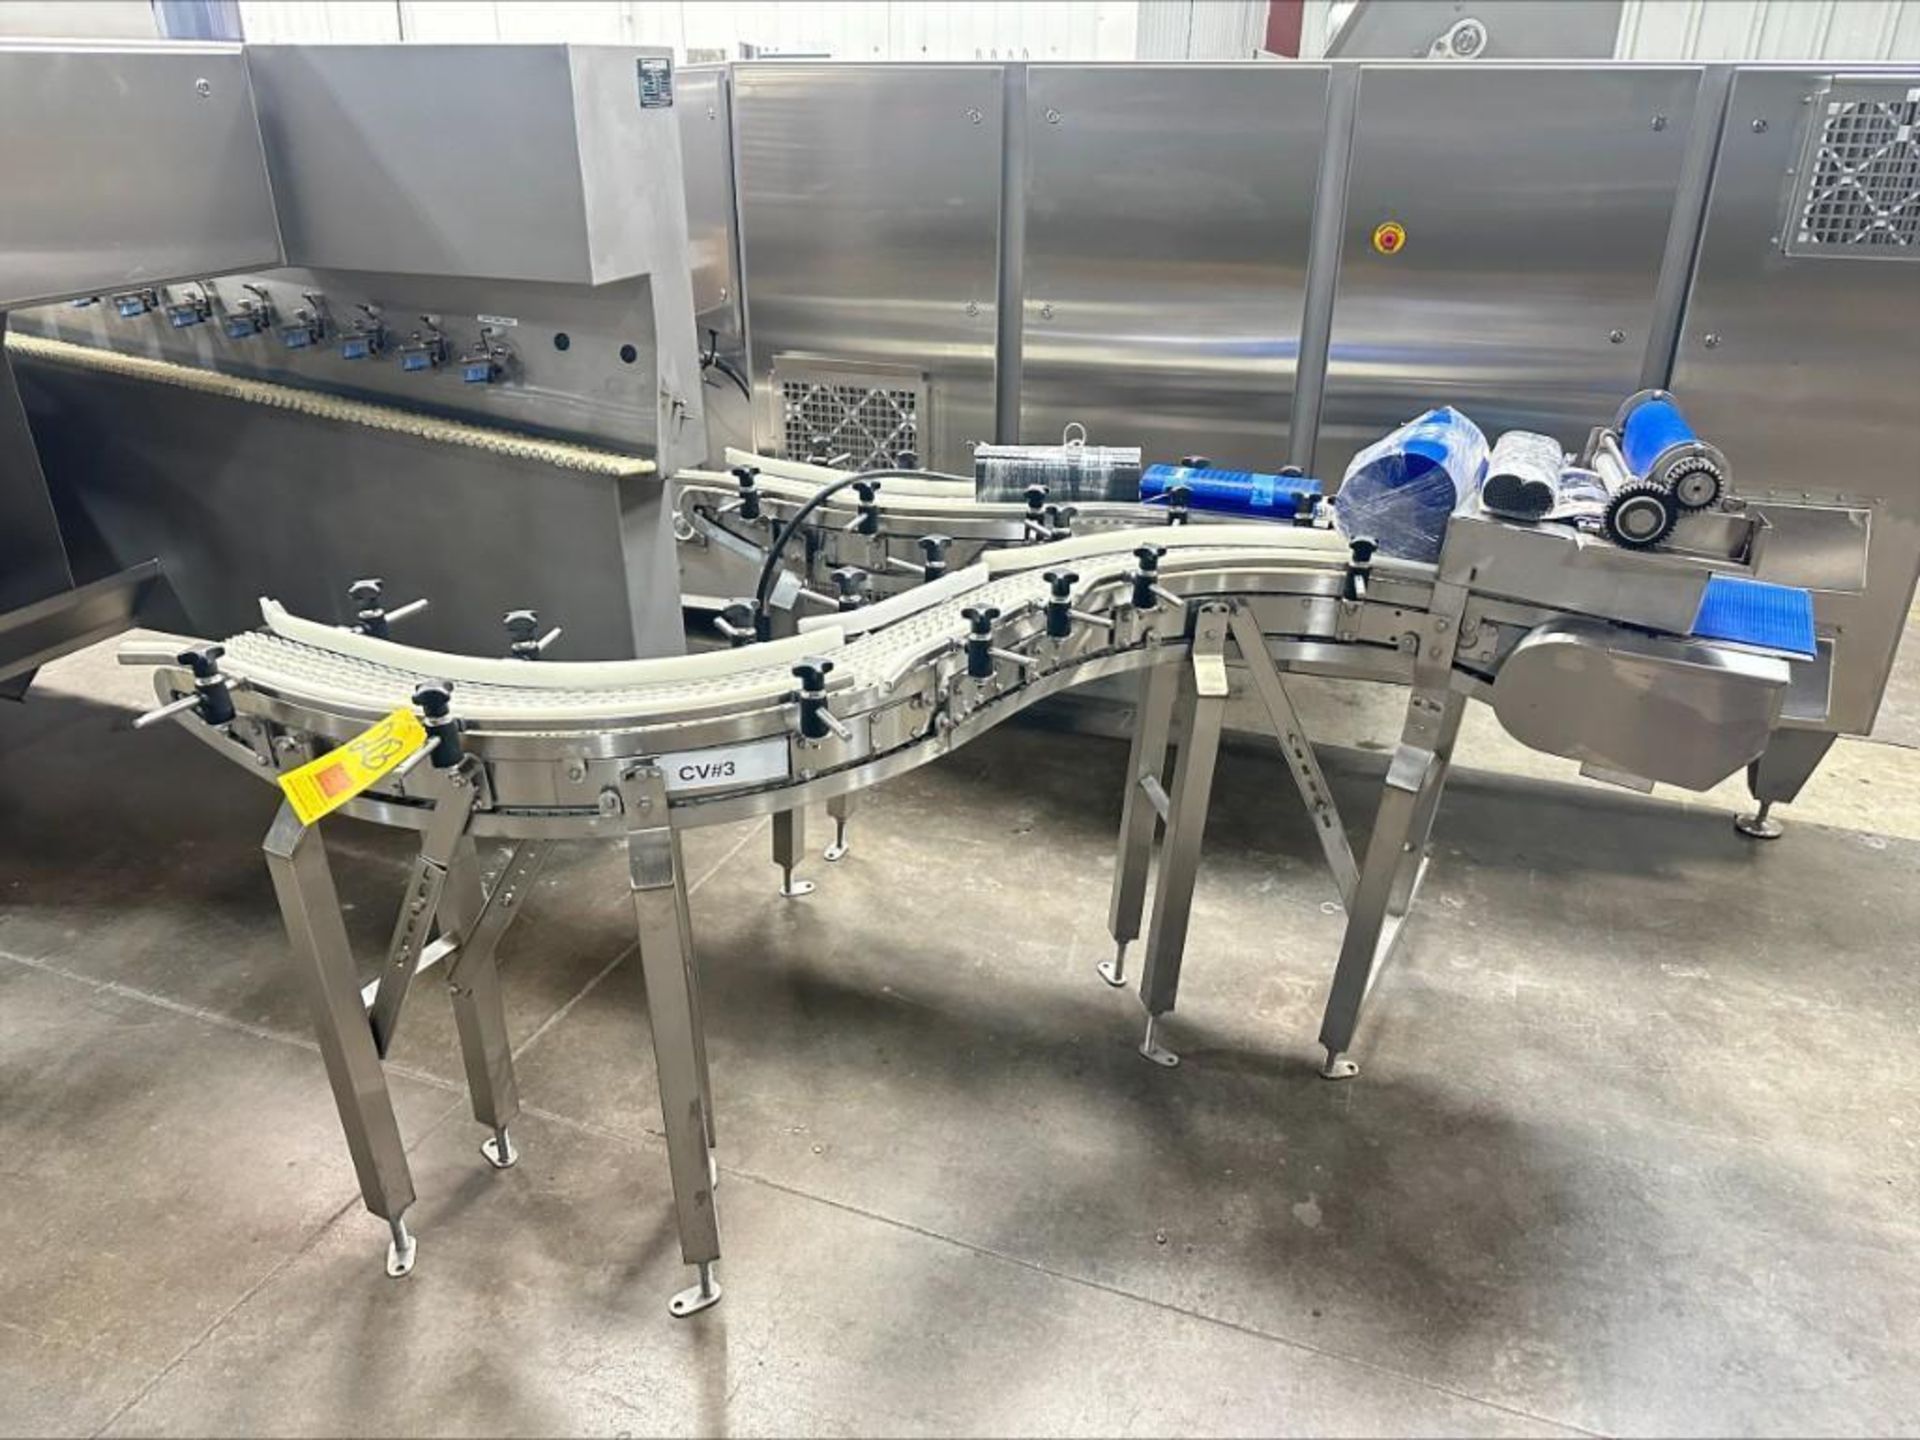 S/S Framed Dual-Lane Conveyor with Drive, (2) 90° and other Turn and Plastic Tabletop Chain